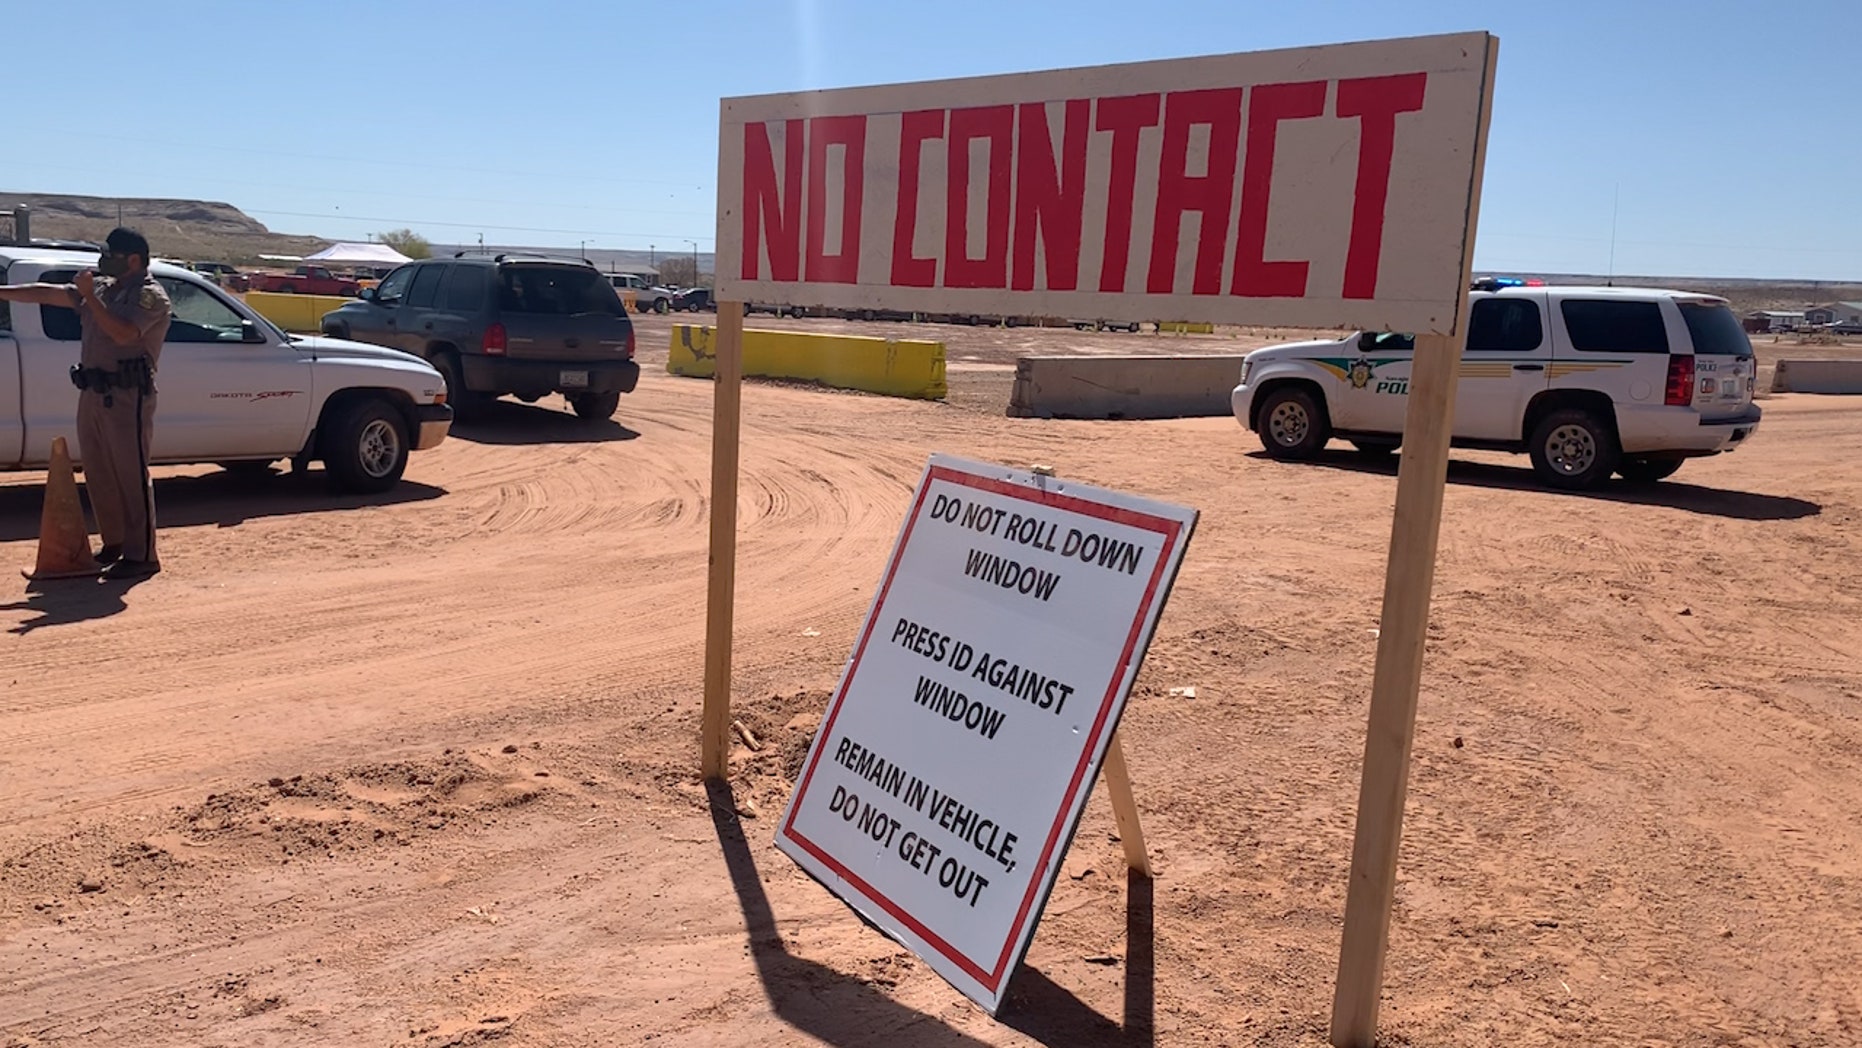 The Navajo Nation has enforced a daily curfew from 8pm - 5am in an effort to stop the spread of COVID19. (Navajo Nation )